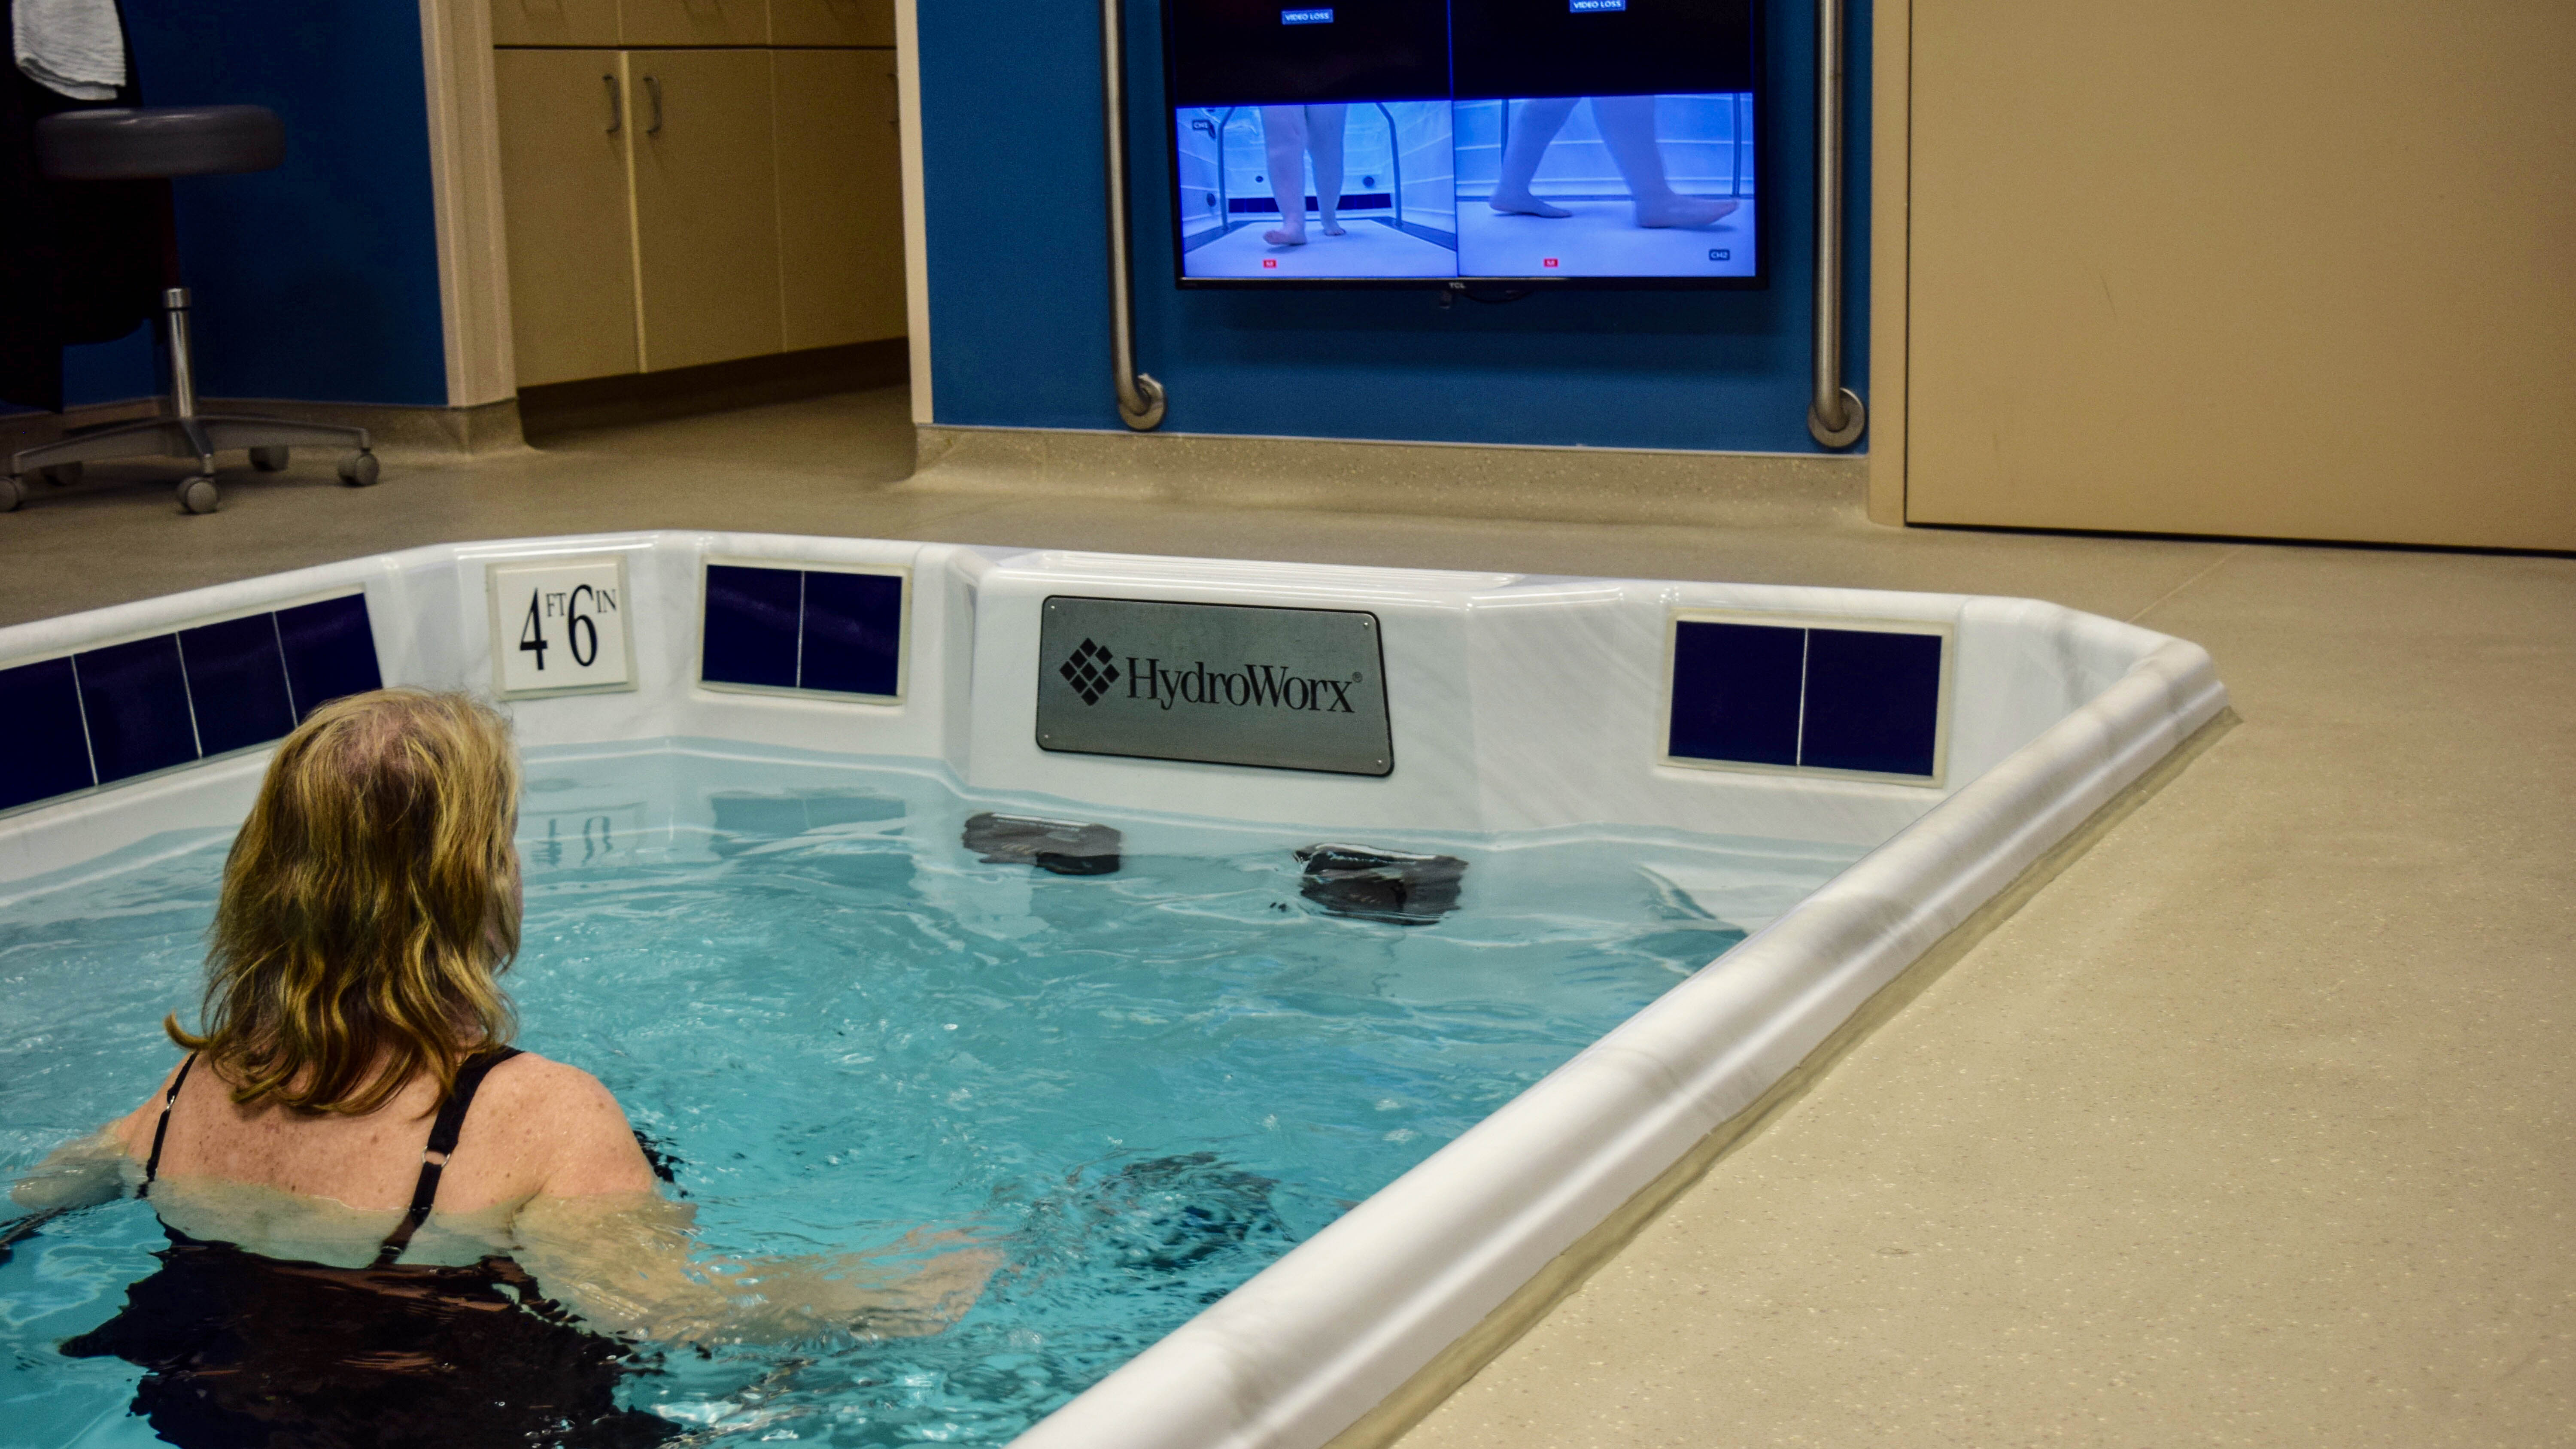 190420 Therapy Cox - Aquatic therapy is rehabilitation in a comfortable environment